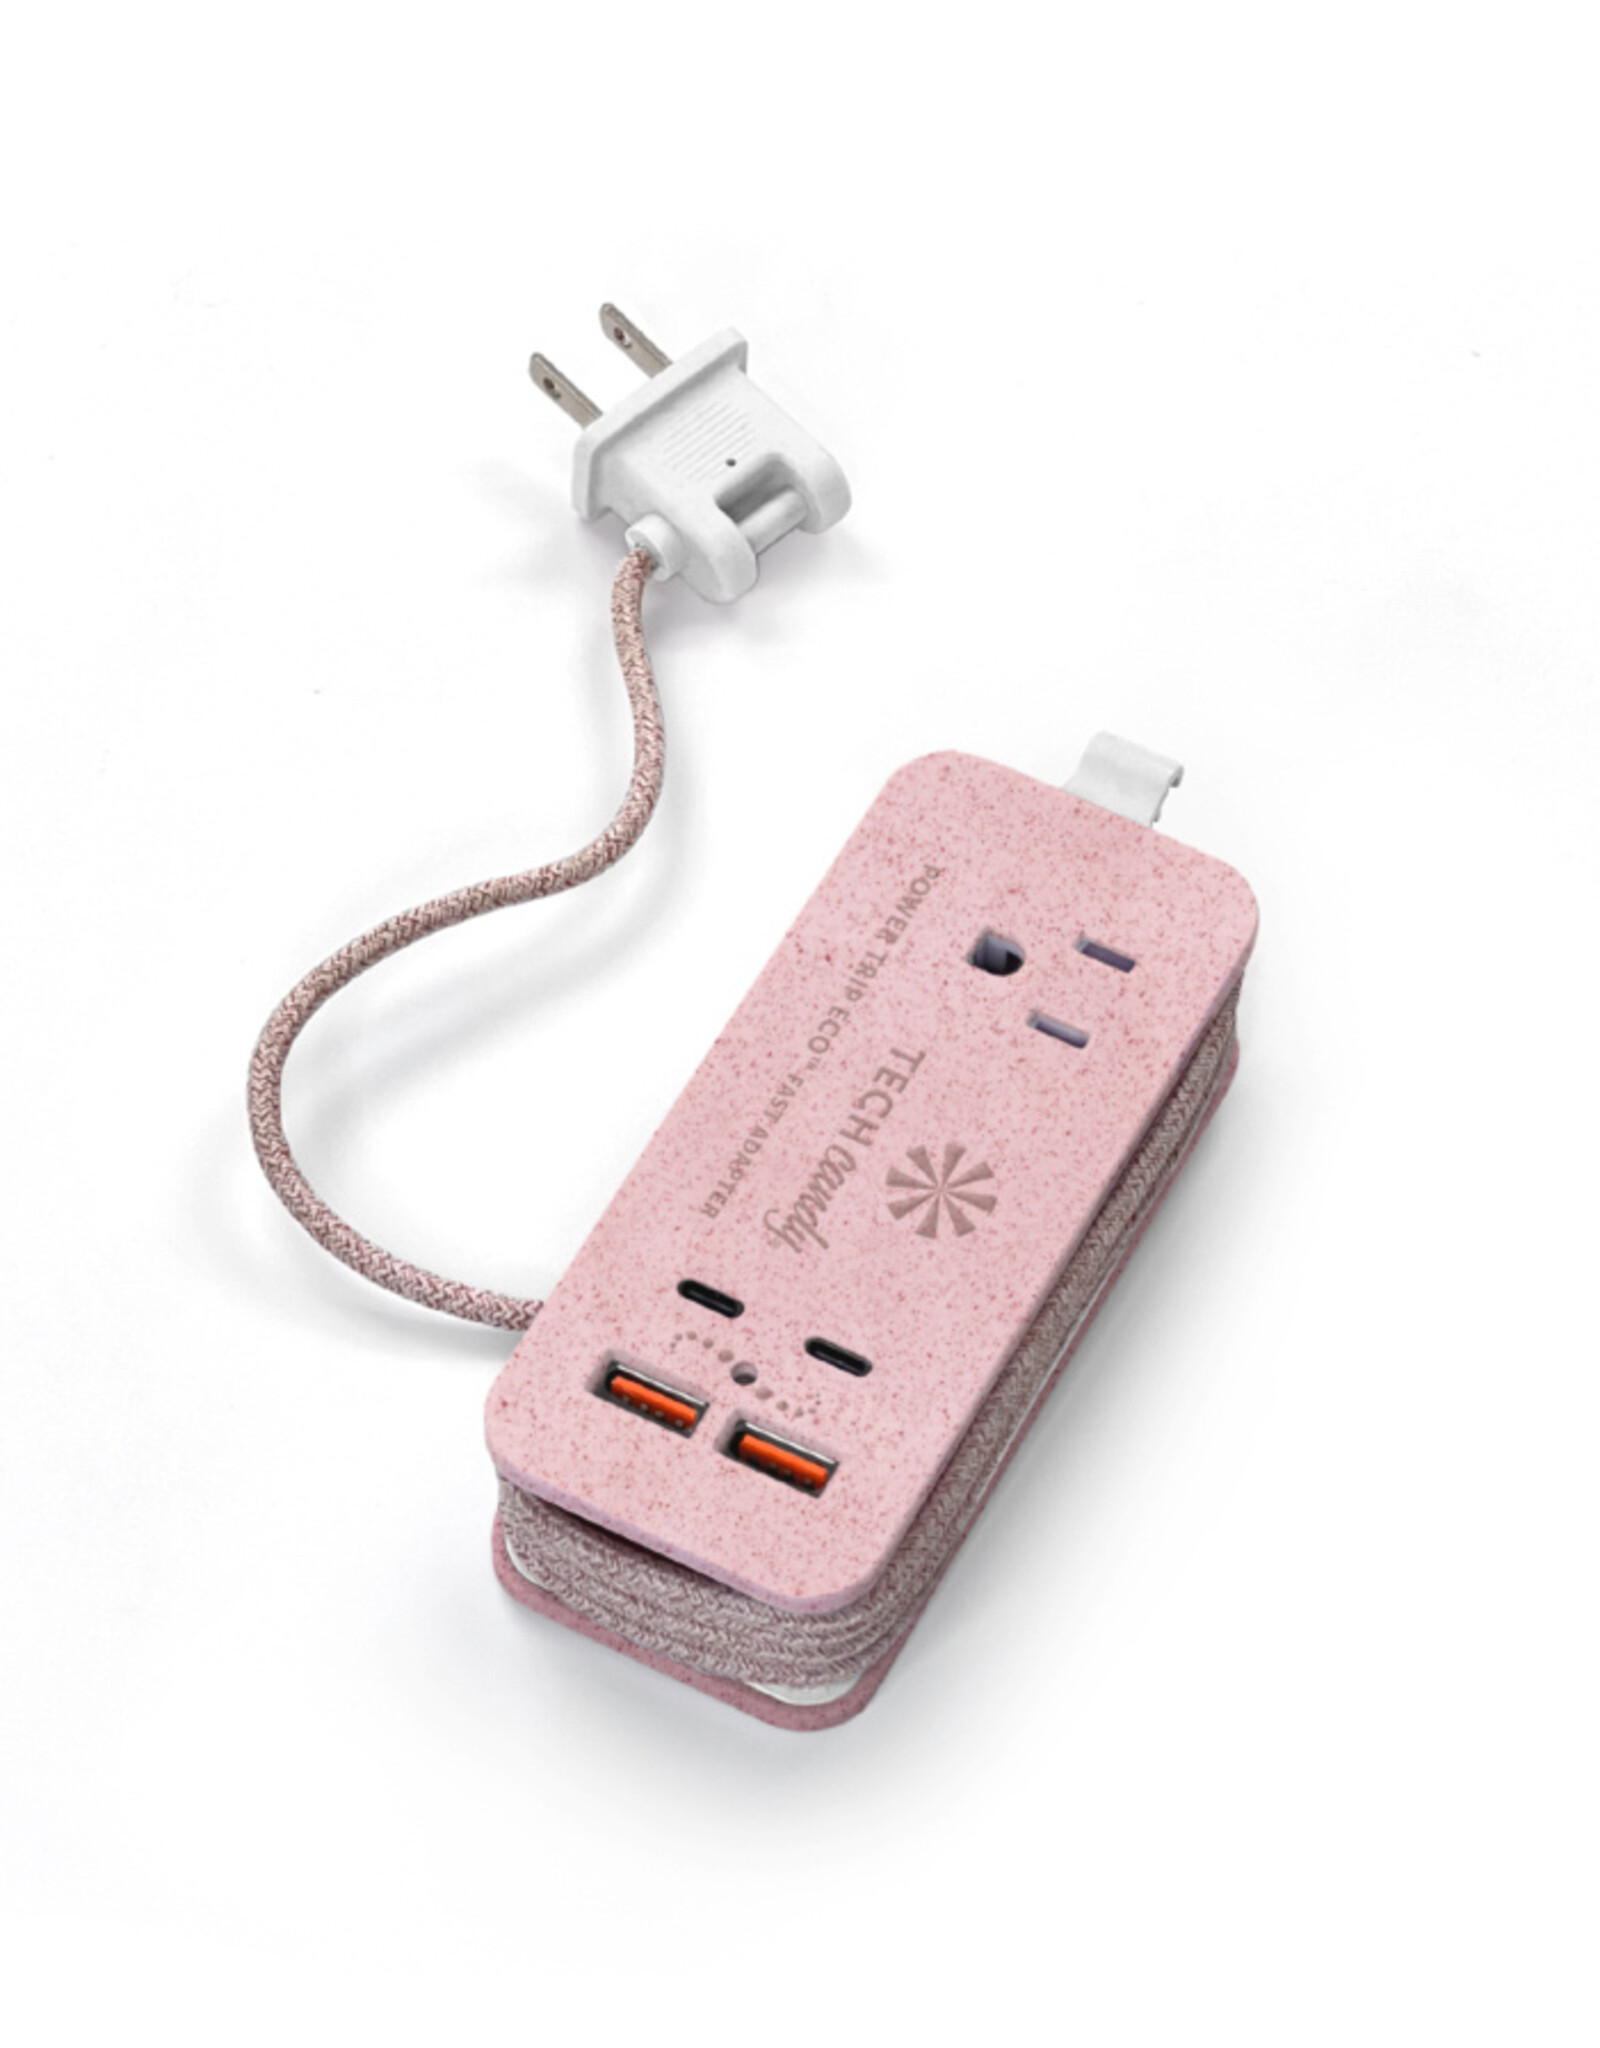 Tech Candy Power Trip Eco Travel Charging Station - Pink